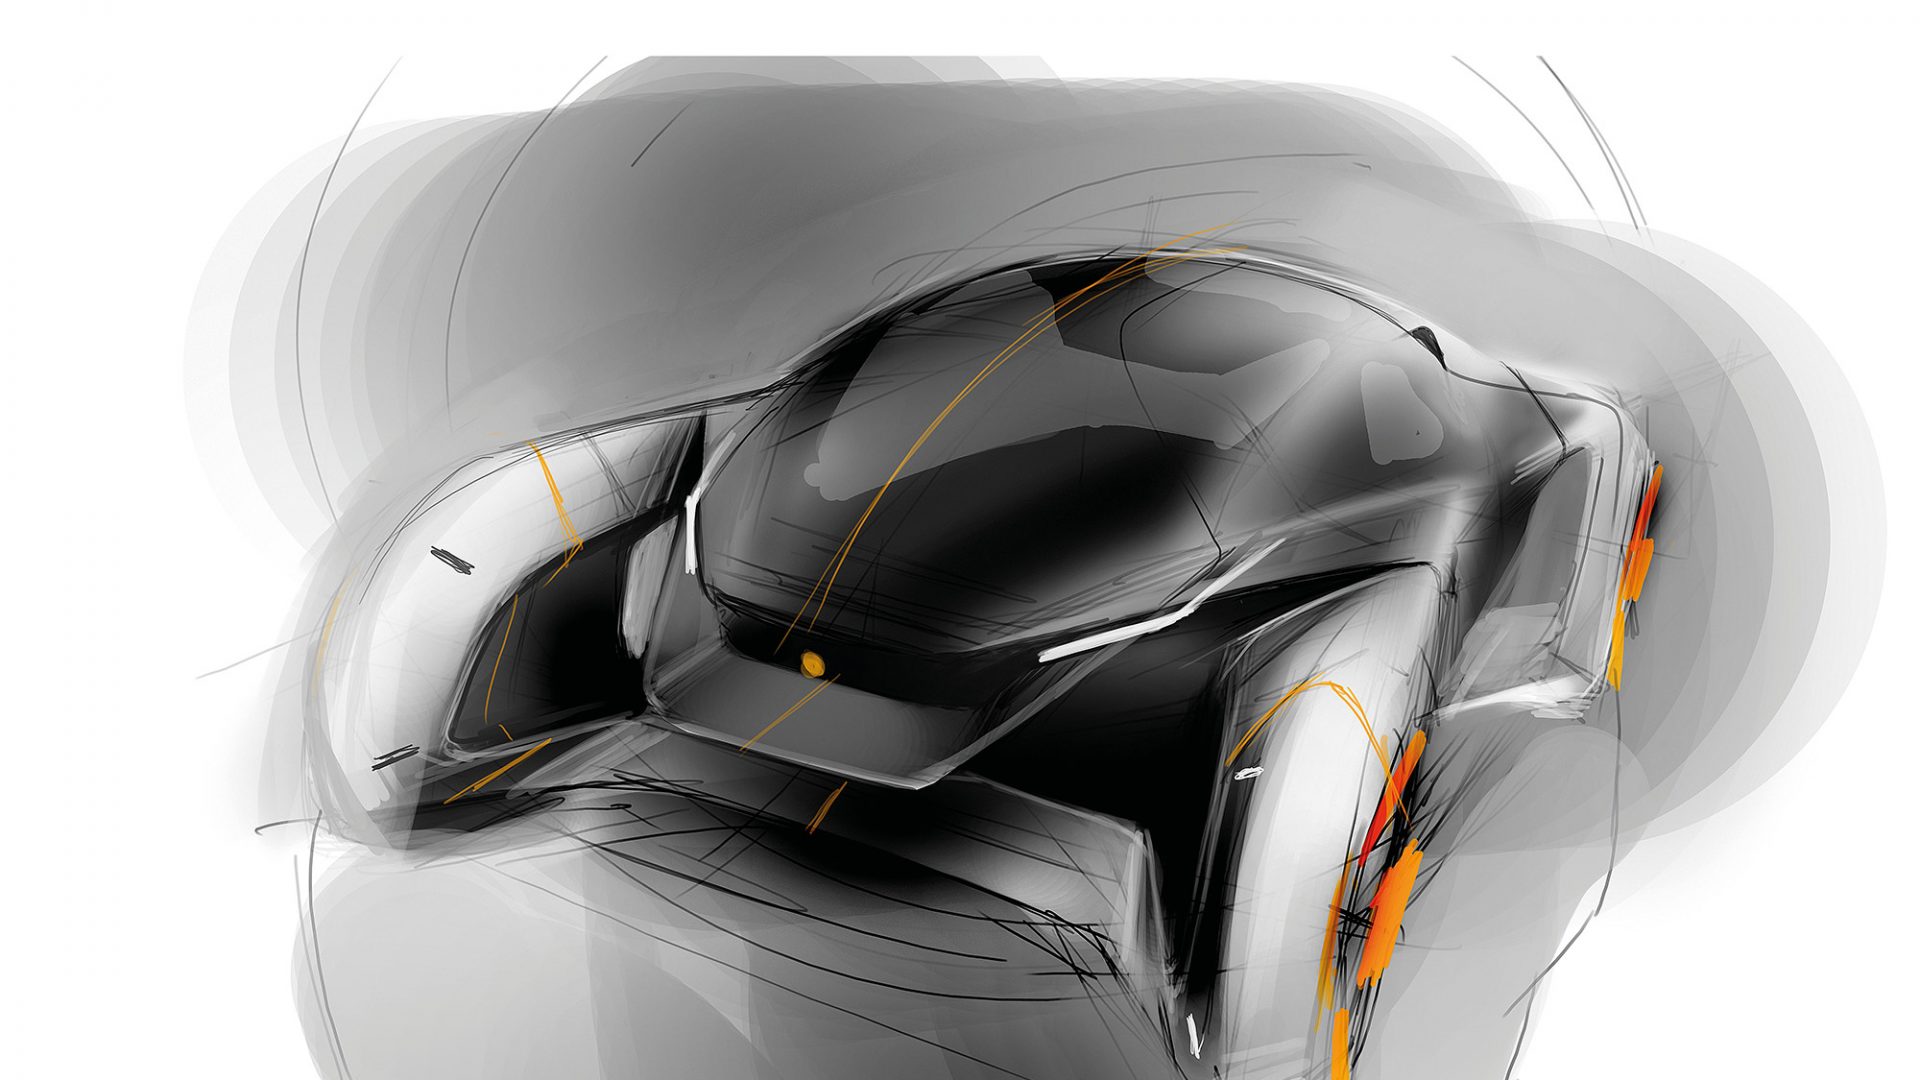 Drawing Mech Designs and Futuristic Car Designs - Doodlers Anonymous